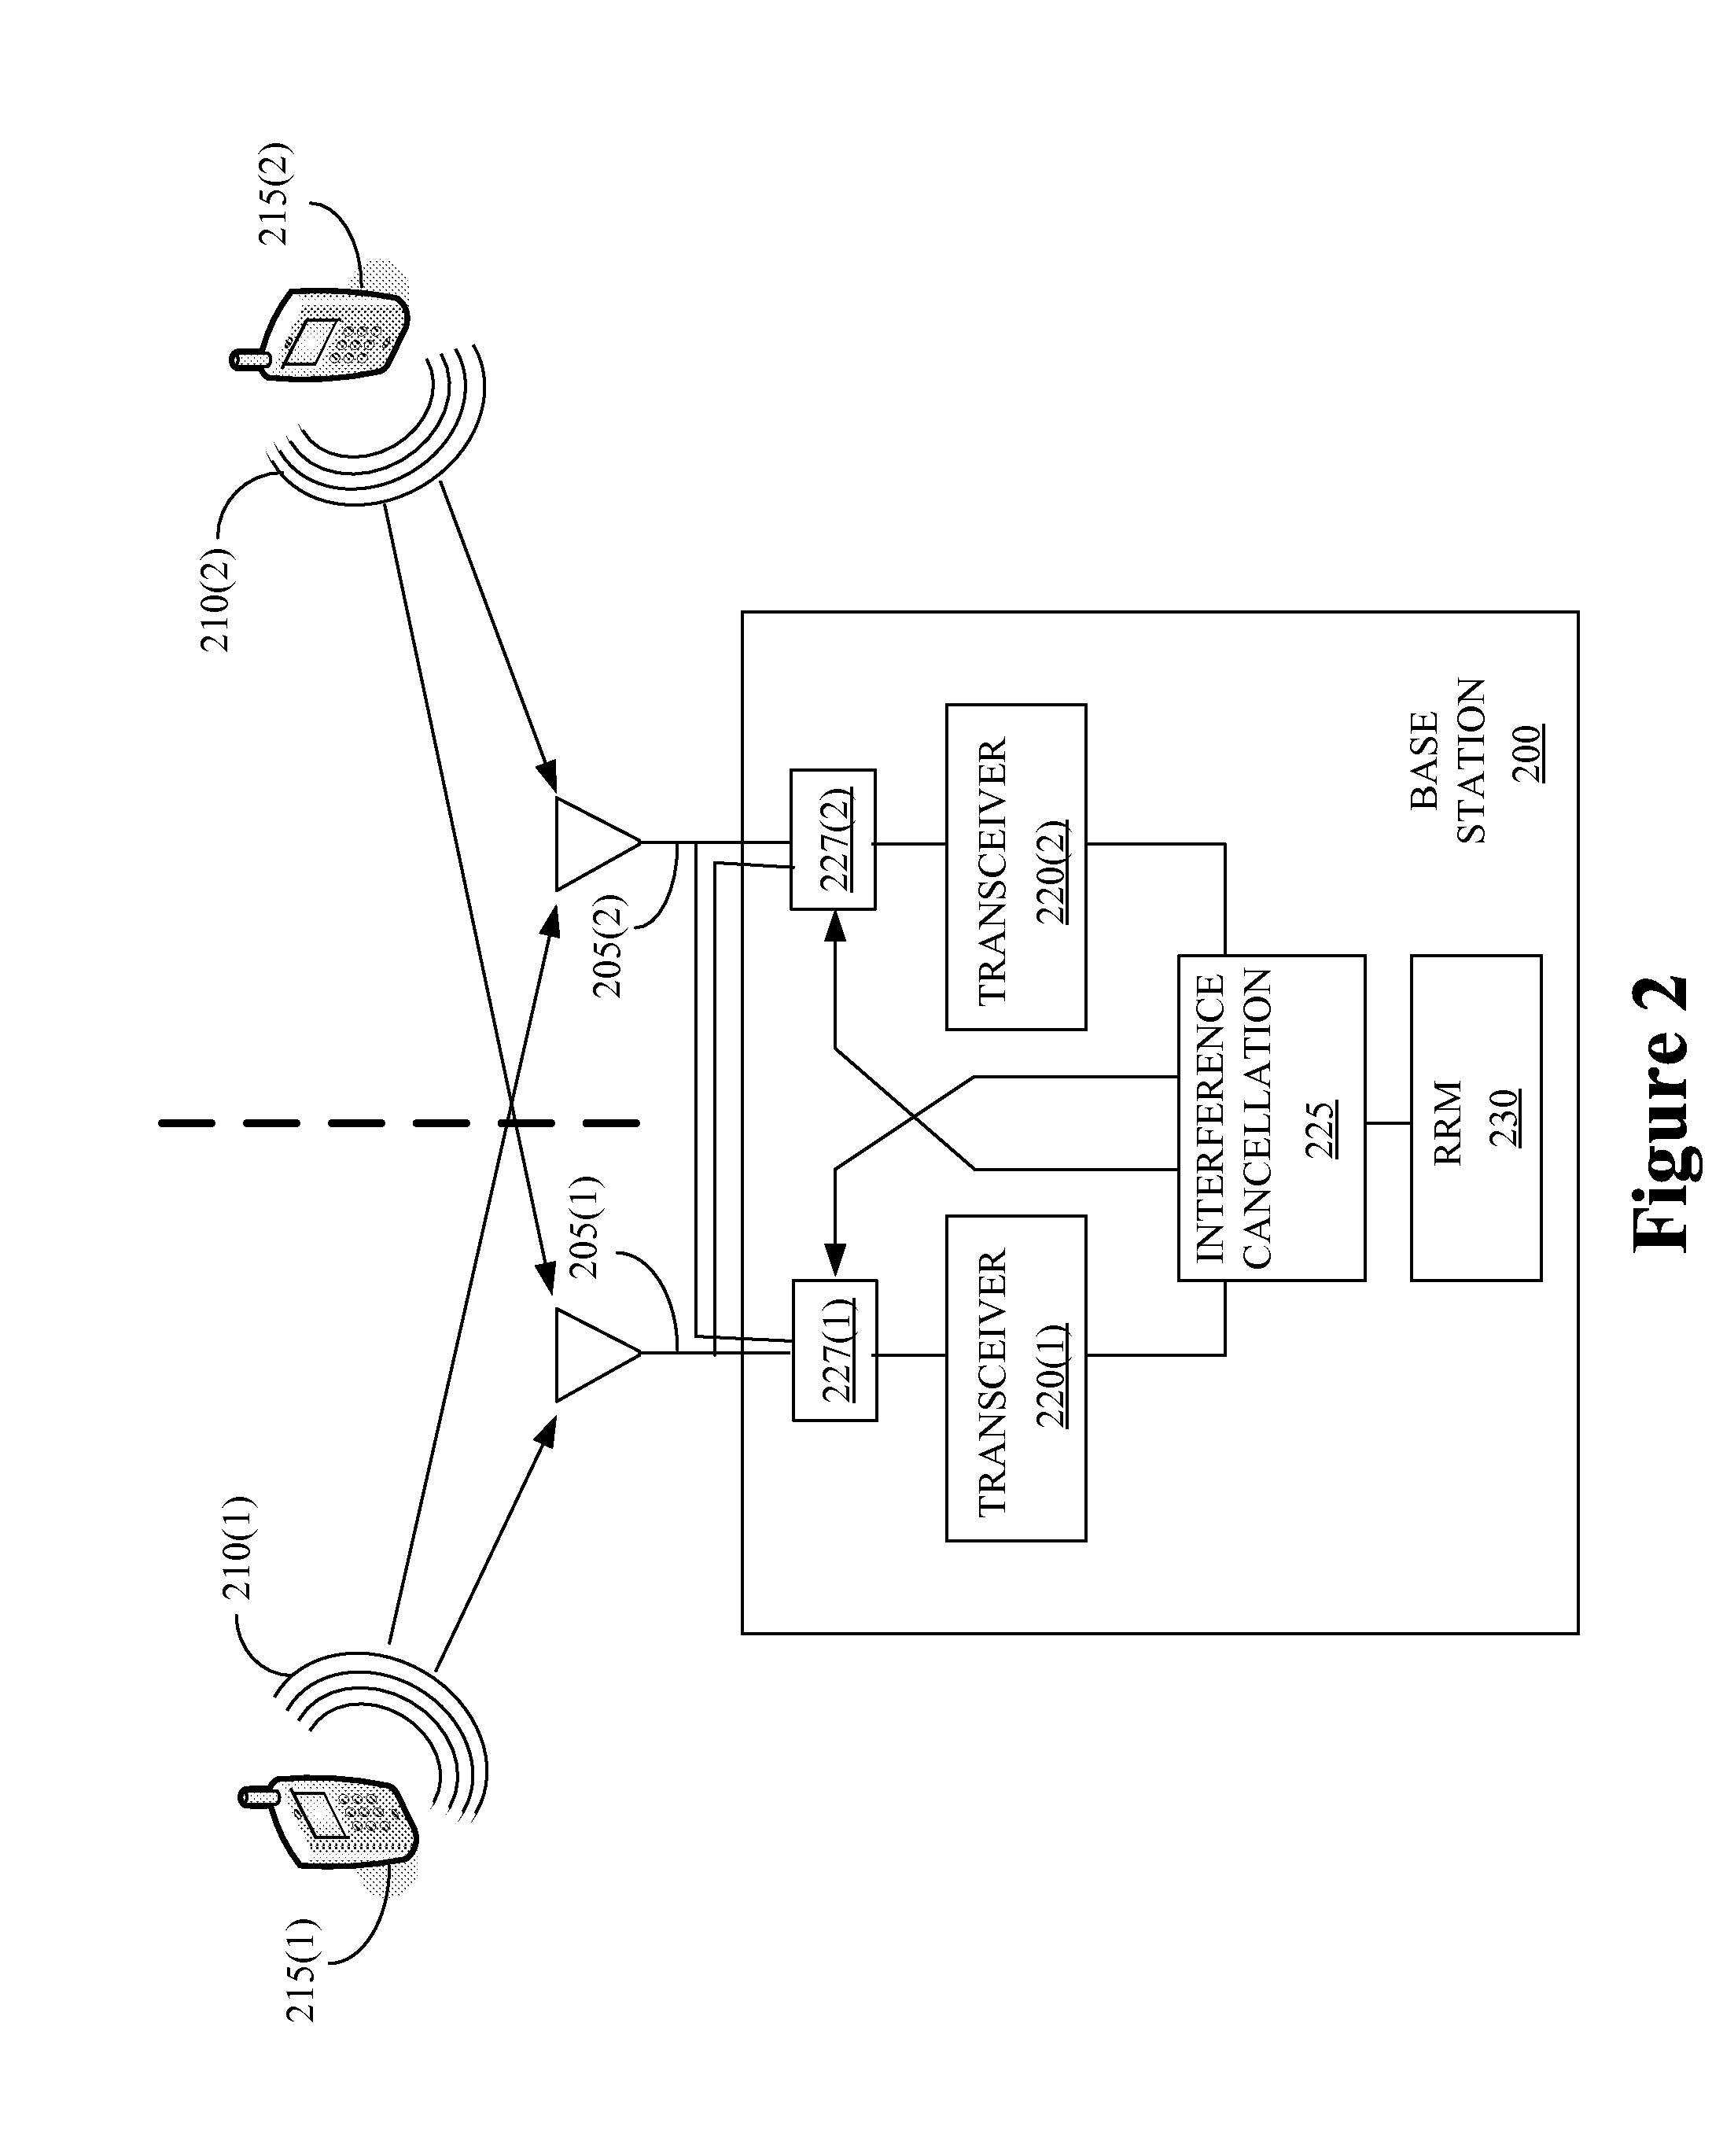 Inter-sector macrodiversity interference cancellation and scheduling